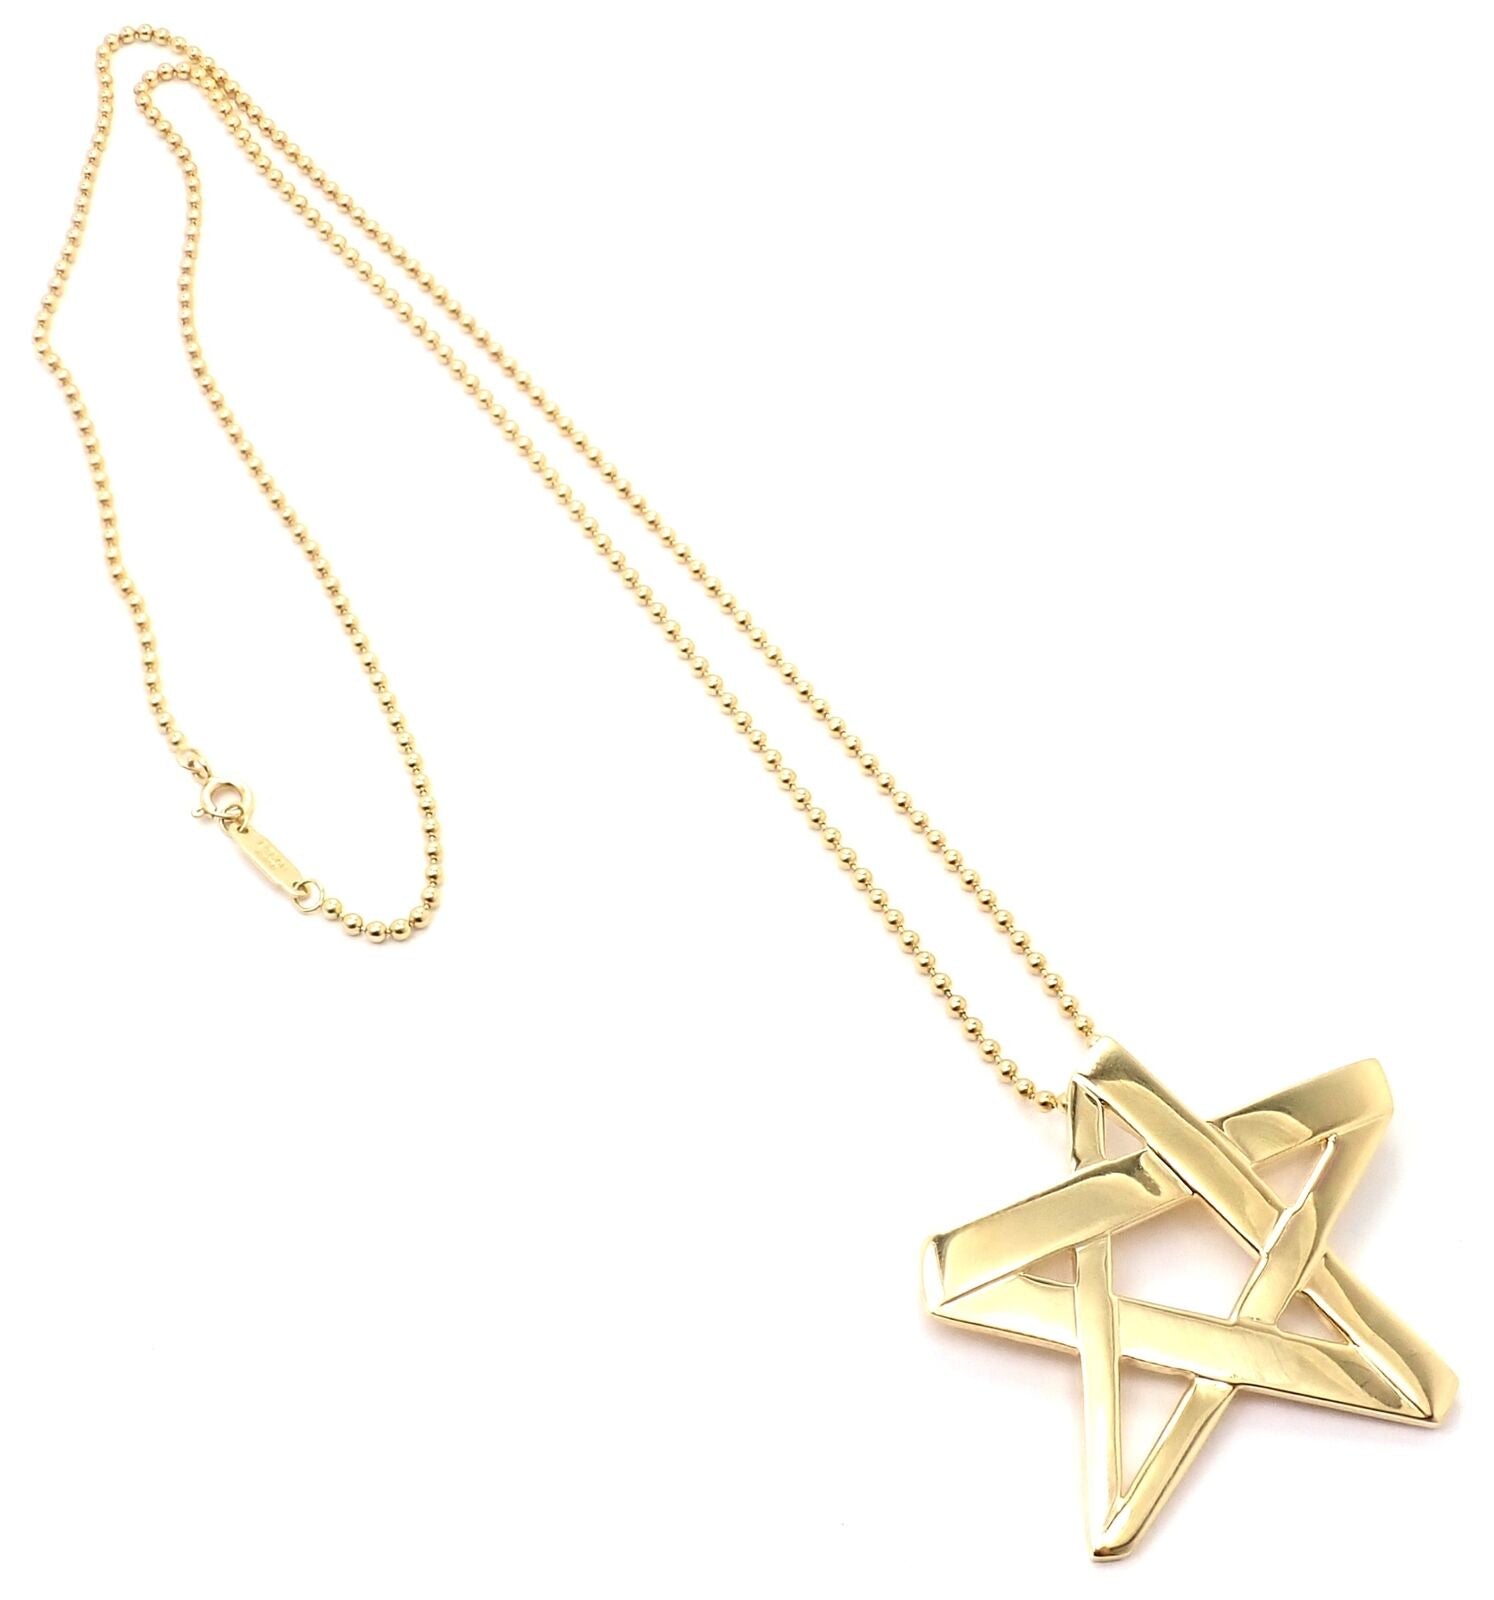 Tiffany & Co. Jewelry & Watches:Fine Jewelry:Necklaces & Pendants Vintage! Tiffany & Co 18k Yellow Gold Star Picasso Large Brooch Pendant Necklace